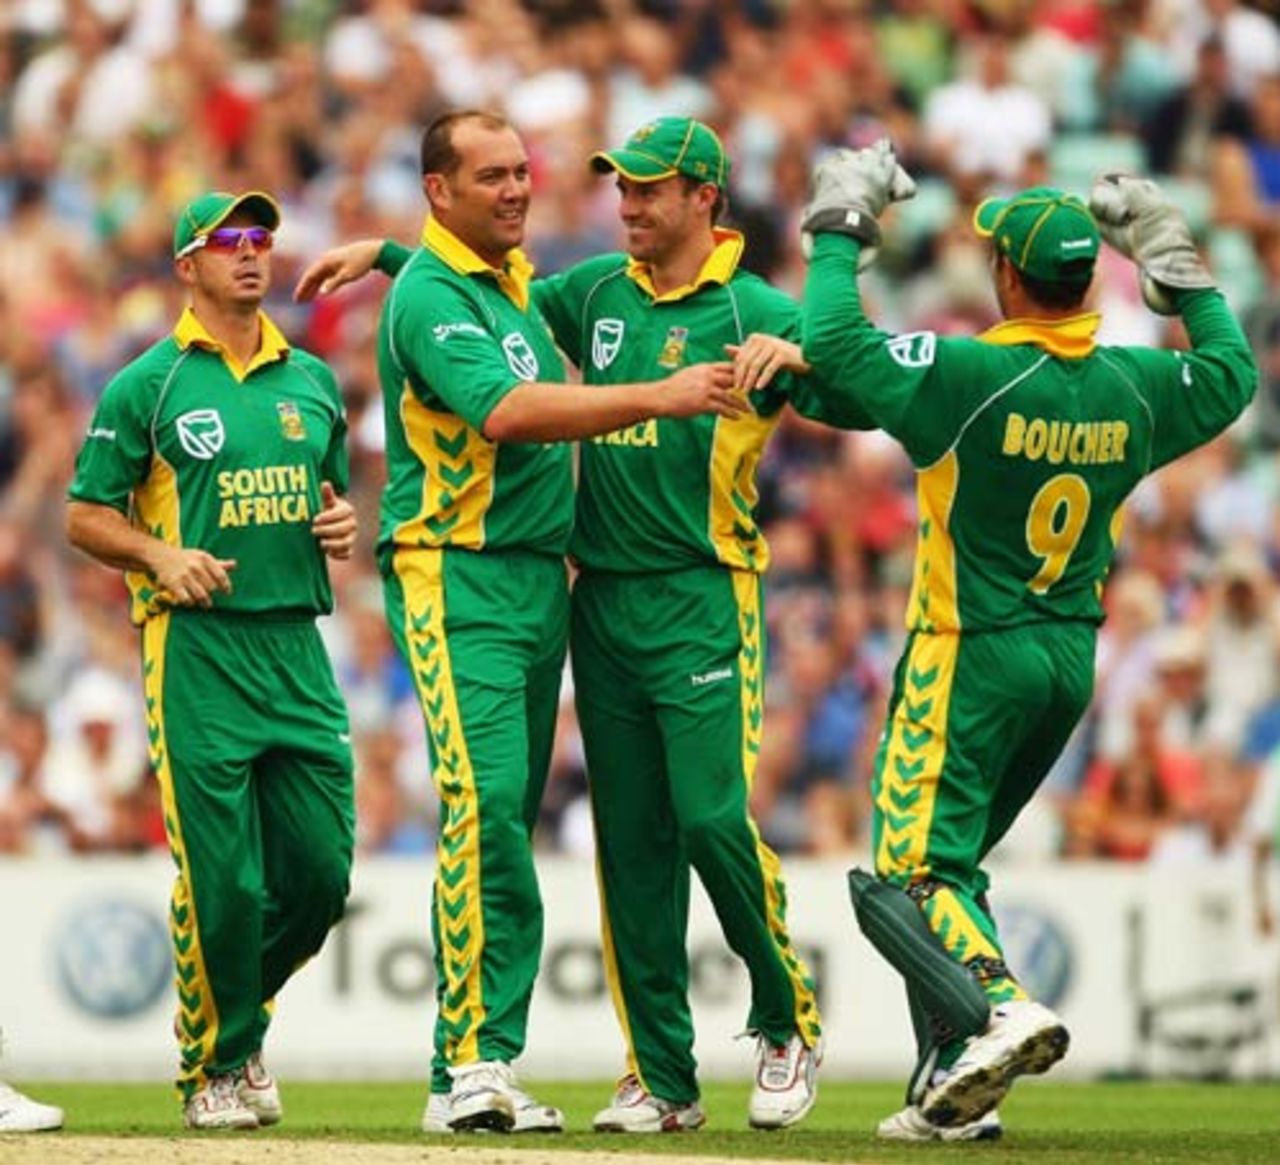 Jacques Kallis is mobbed after bowling Owais Shah, England v South Africa, 3rd ODI, The Oval, August 29, 2008